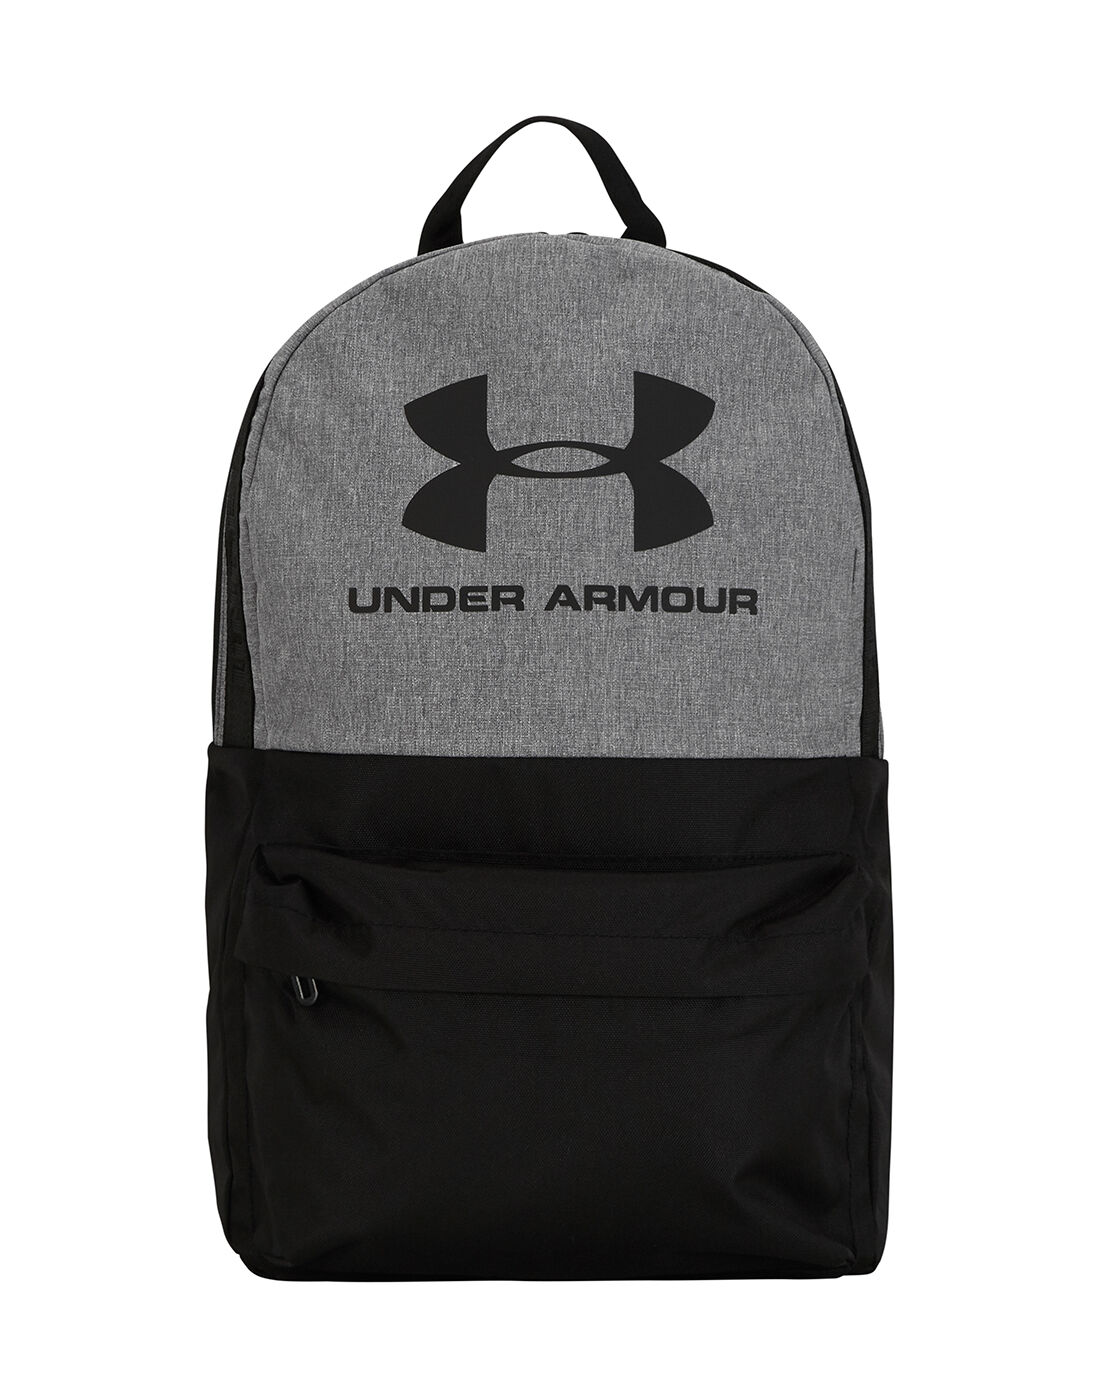 Under Armour Loudon Backpack | Life 